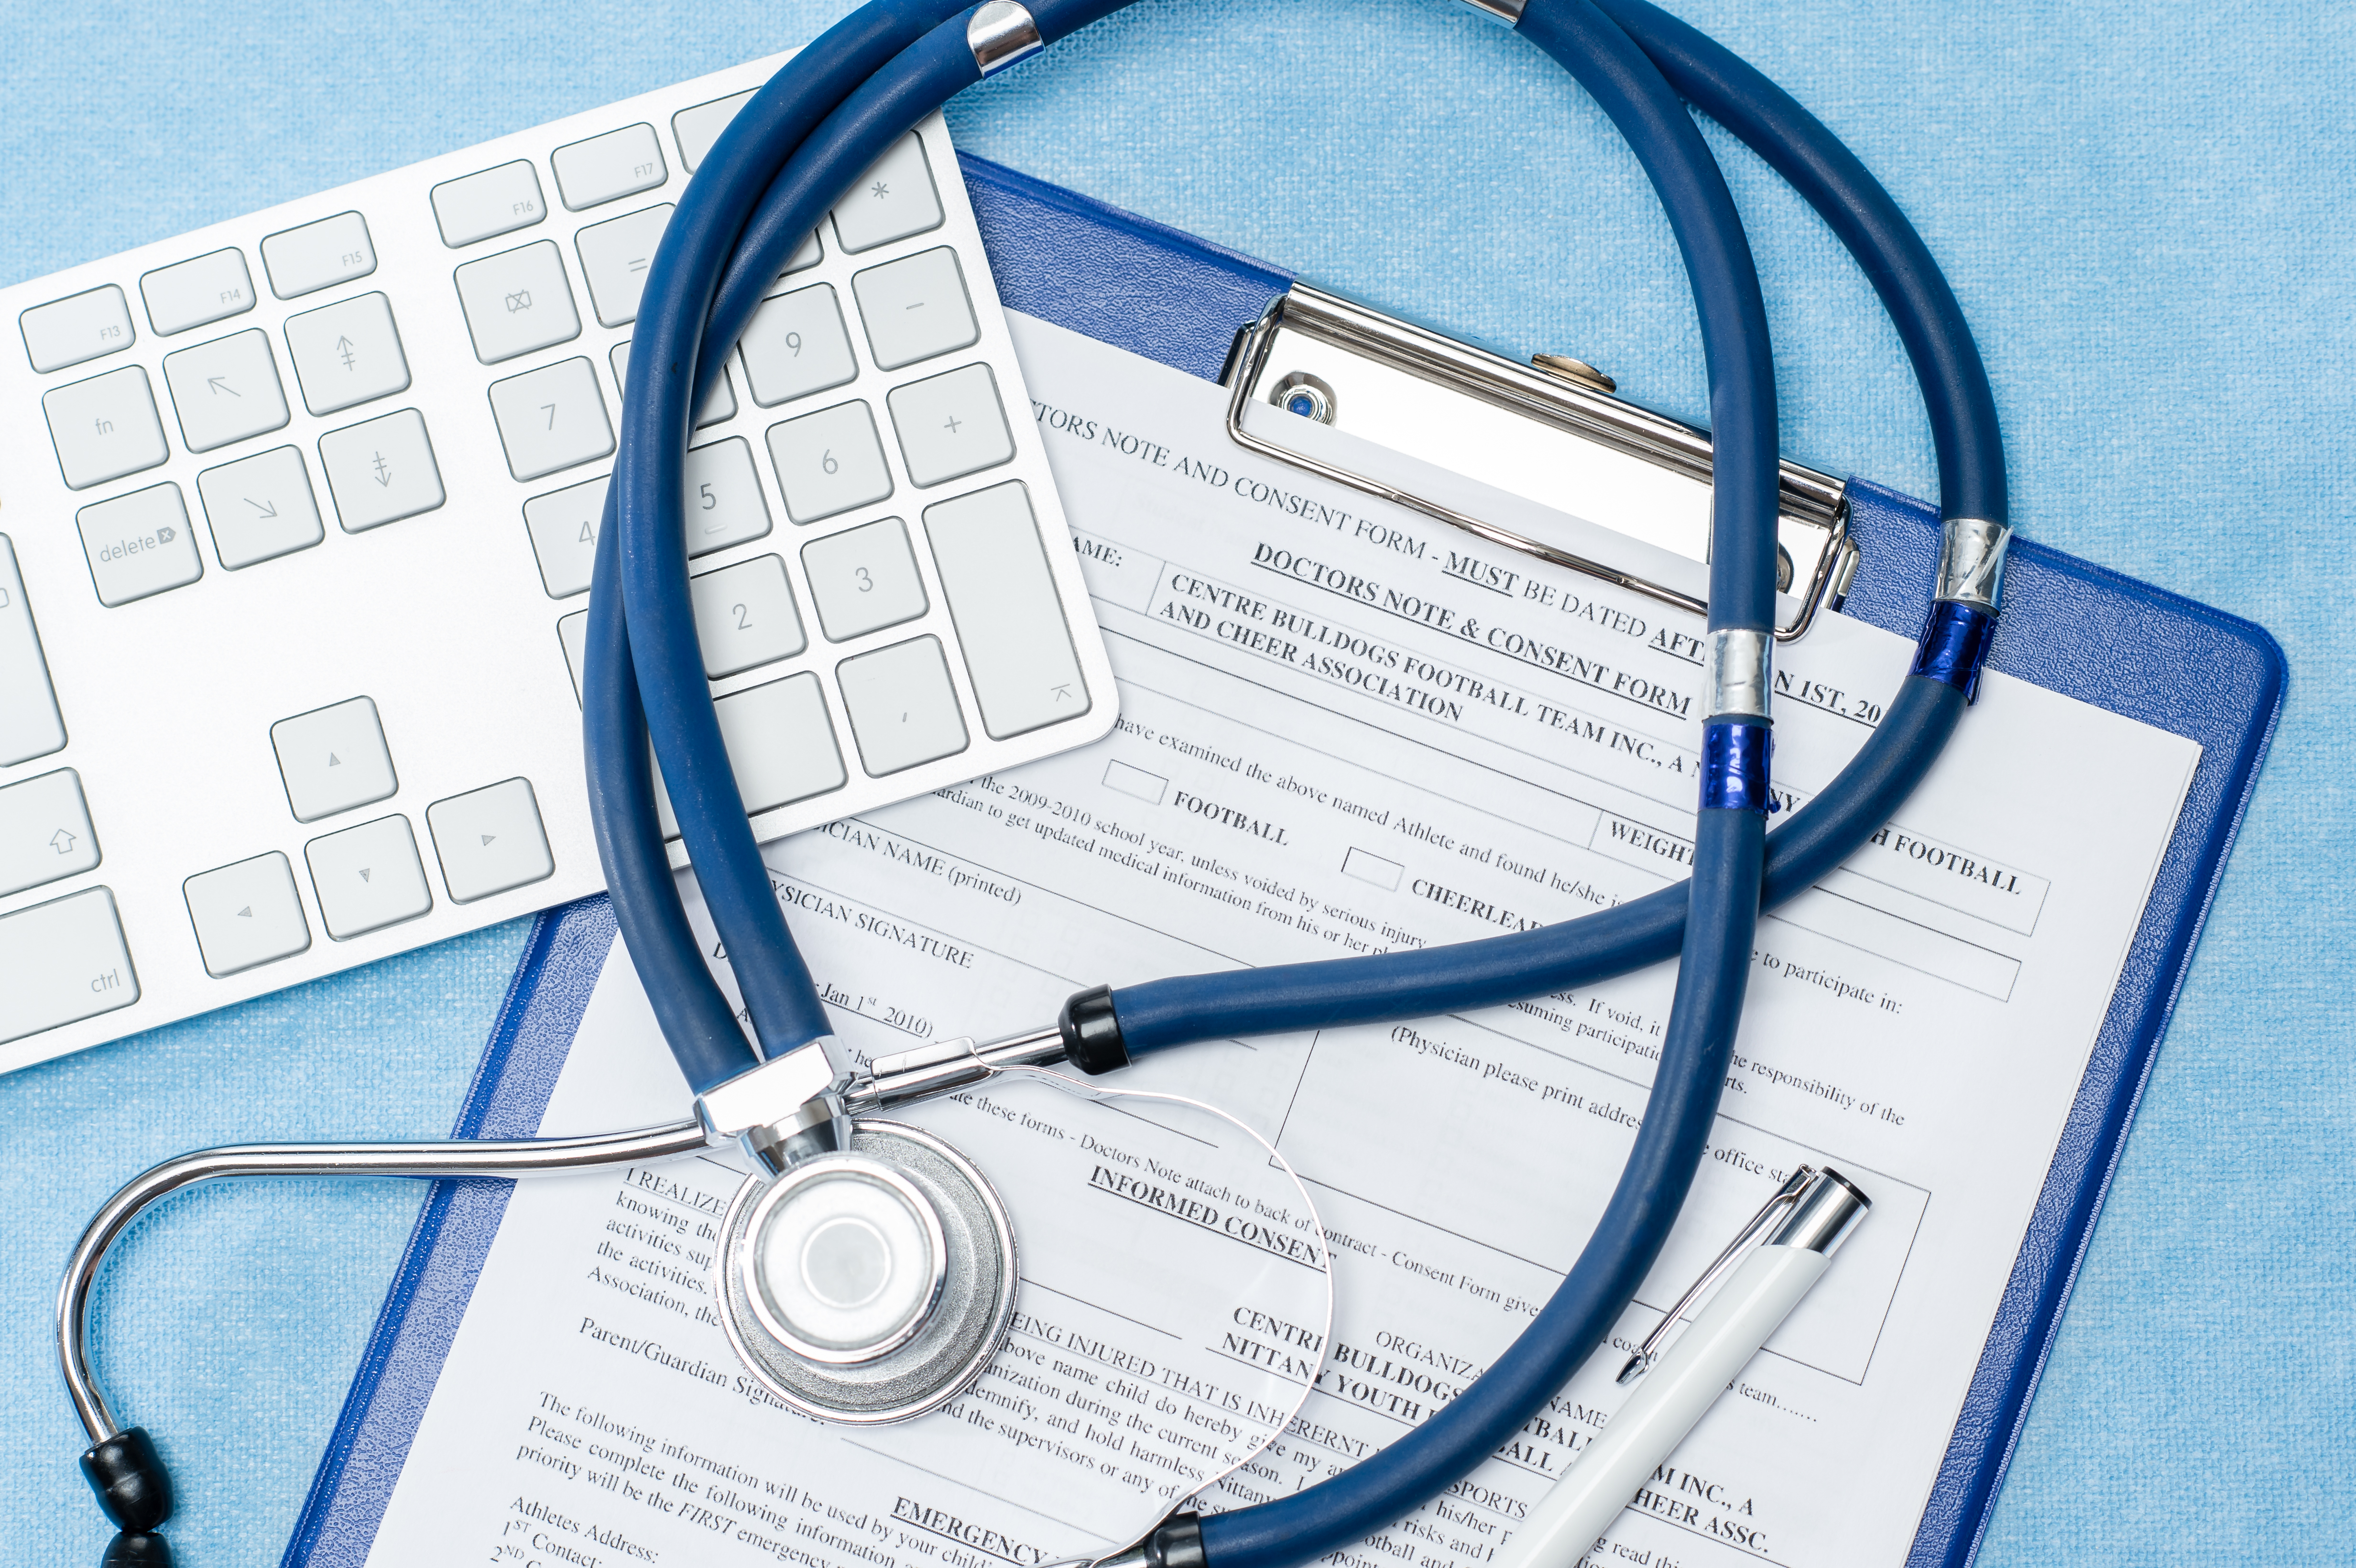 Stethoscope laying over doctors emergency report